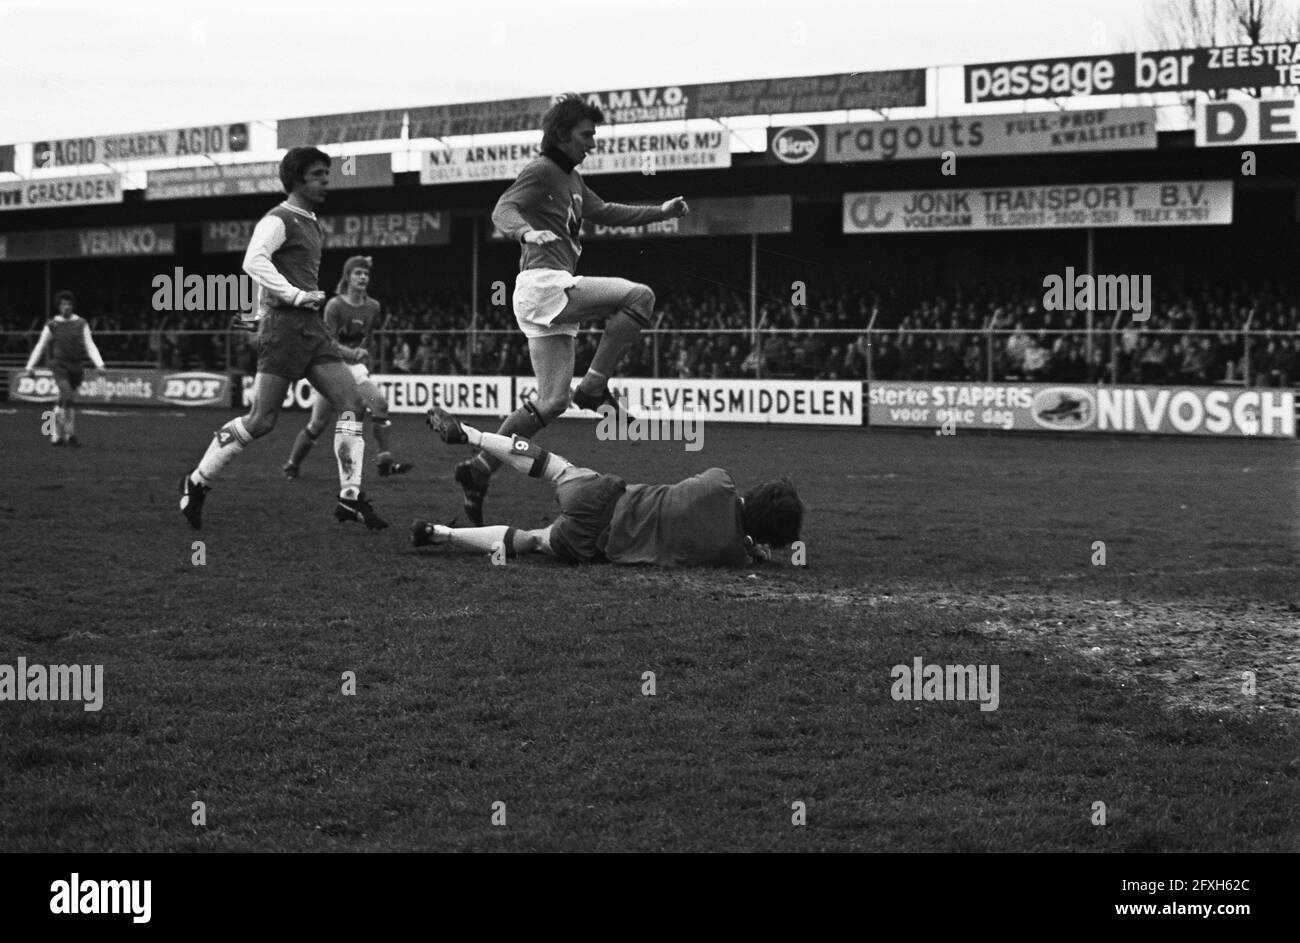 Volendam v Haarlem 3-1 (3rd round KNVB cup ); Bond scores 1st goal, keeper Poldervaart misses, 29 December 1974, sports, soccer, The Netherlands, 20th century press agency photo, news to remember, documentary, historic photography 1945-1990, visual stories, human history of the Twentieth Century, capturing moments in time Stock Photo